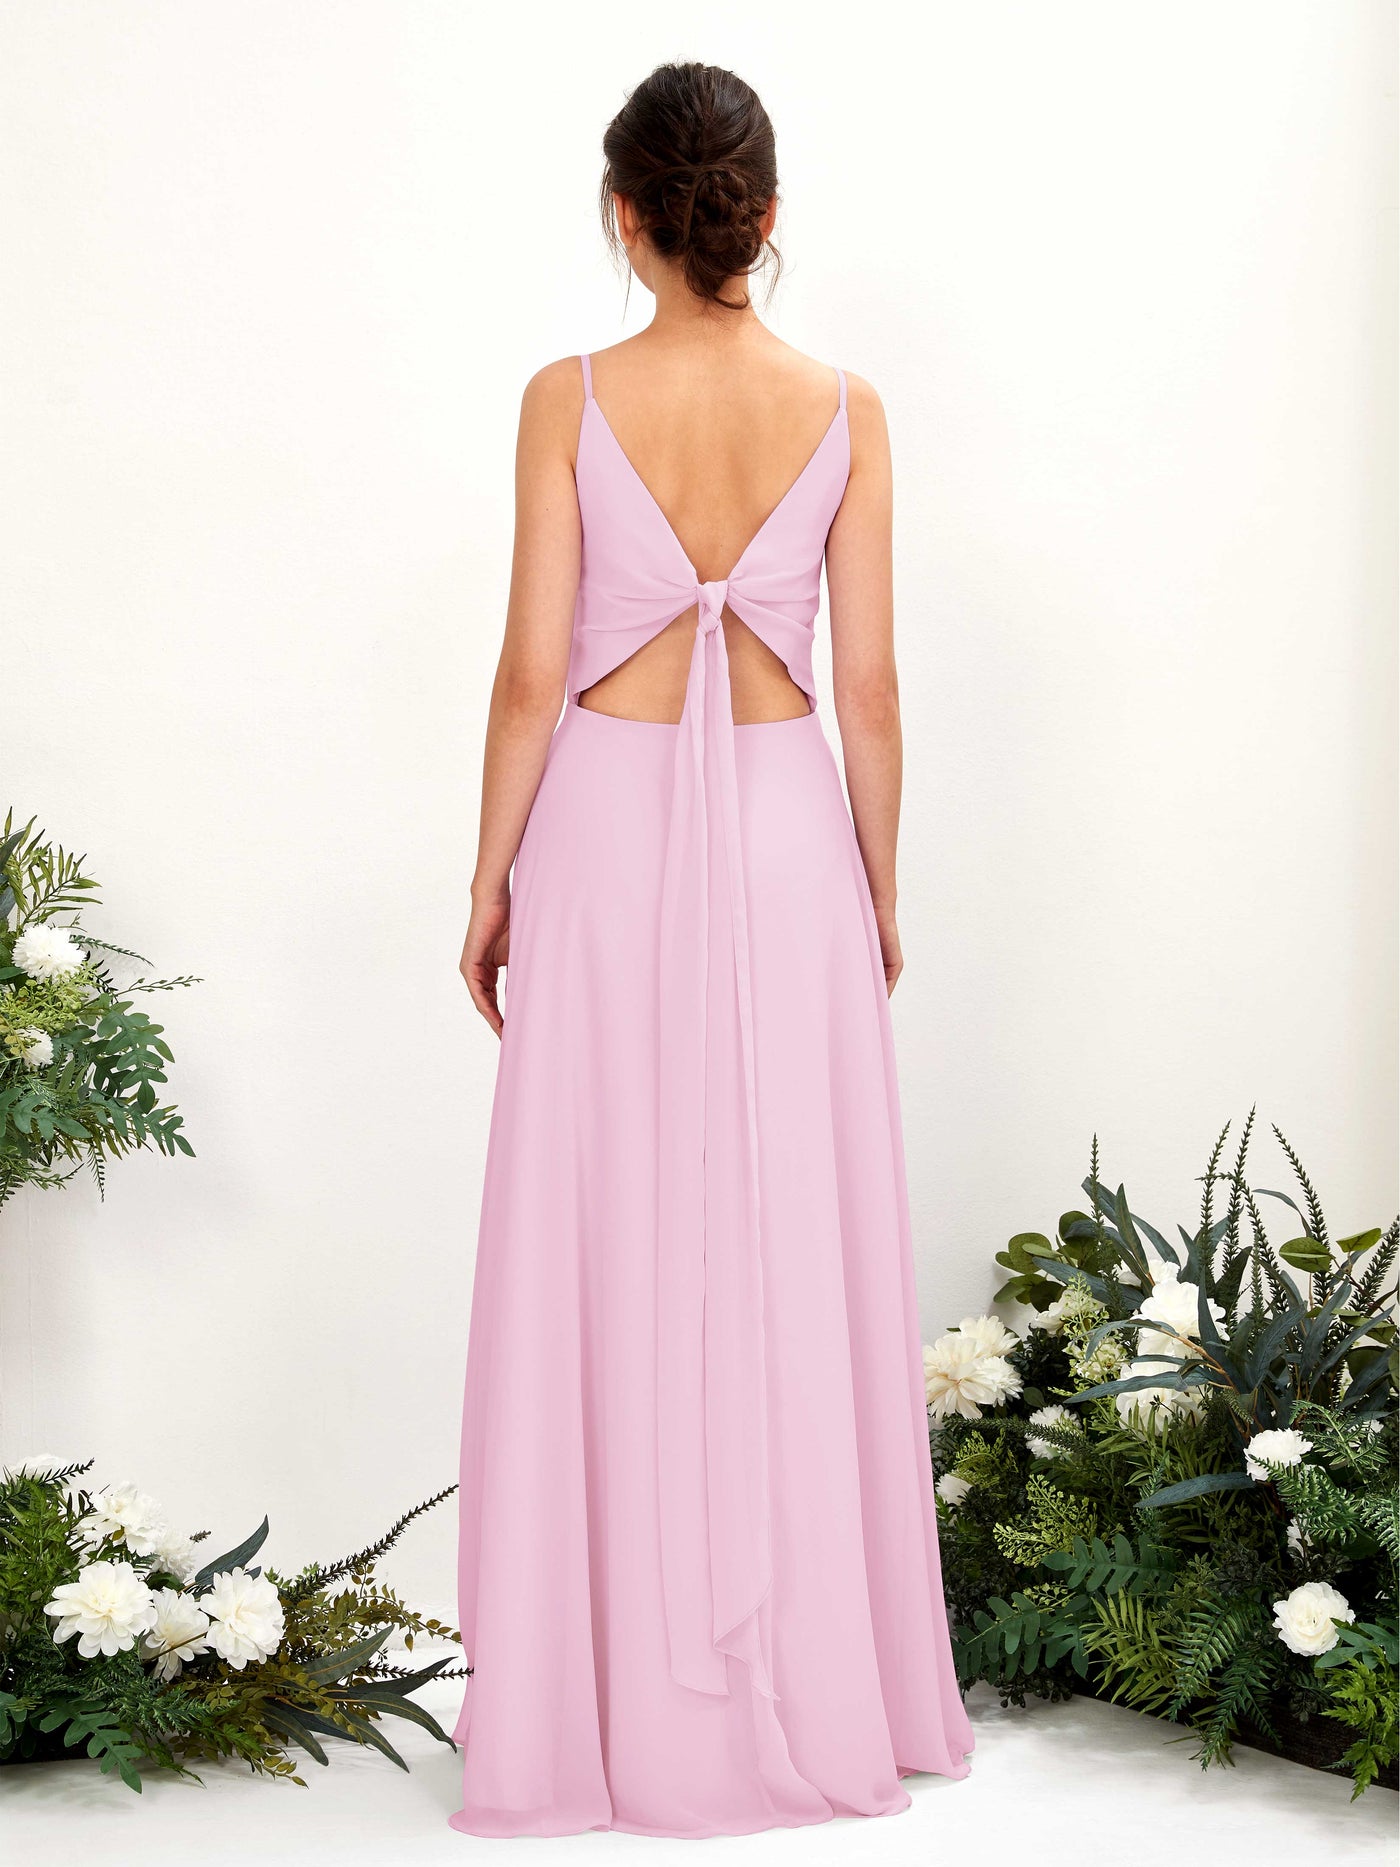 Candy Pink Bridesmaid Dresses Bridesmaid Dress A-line Chiffon Spaghetti-straps Full Length Sleeveless Wedding Party Dress (81220639)#color_candy-pink